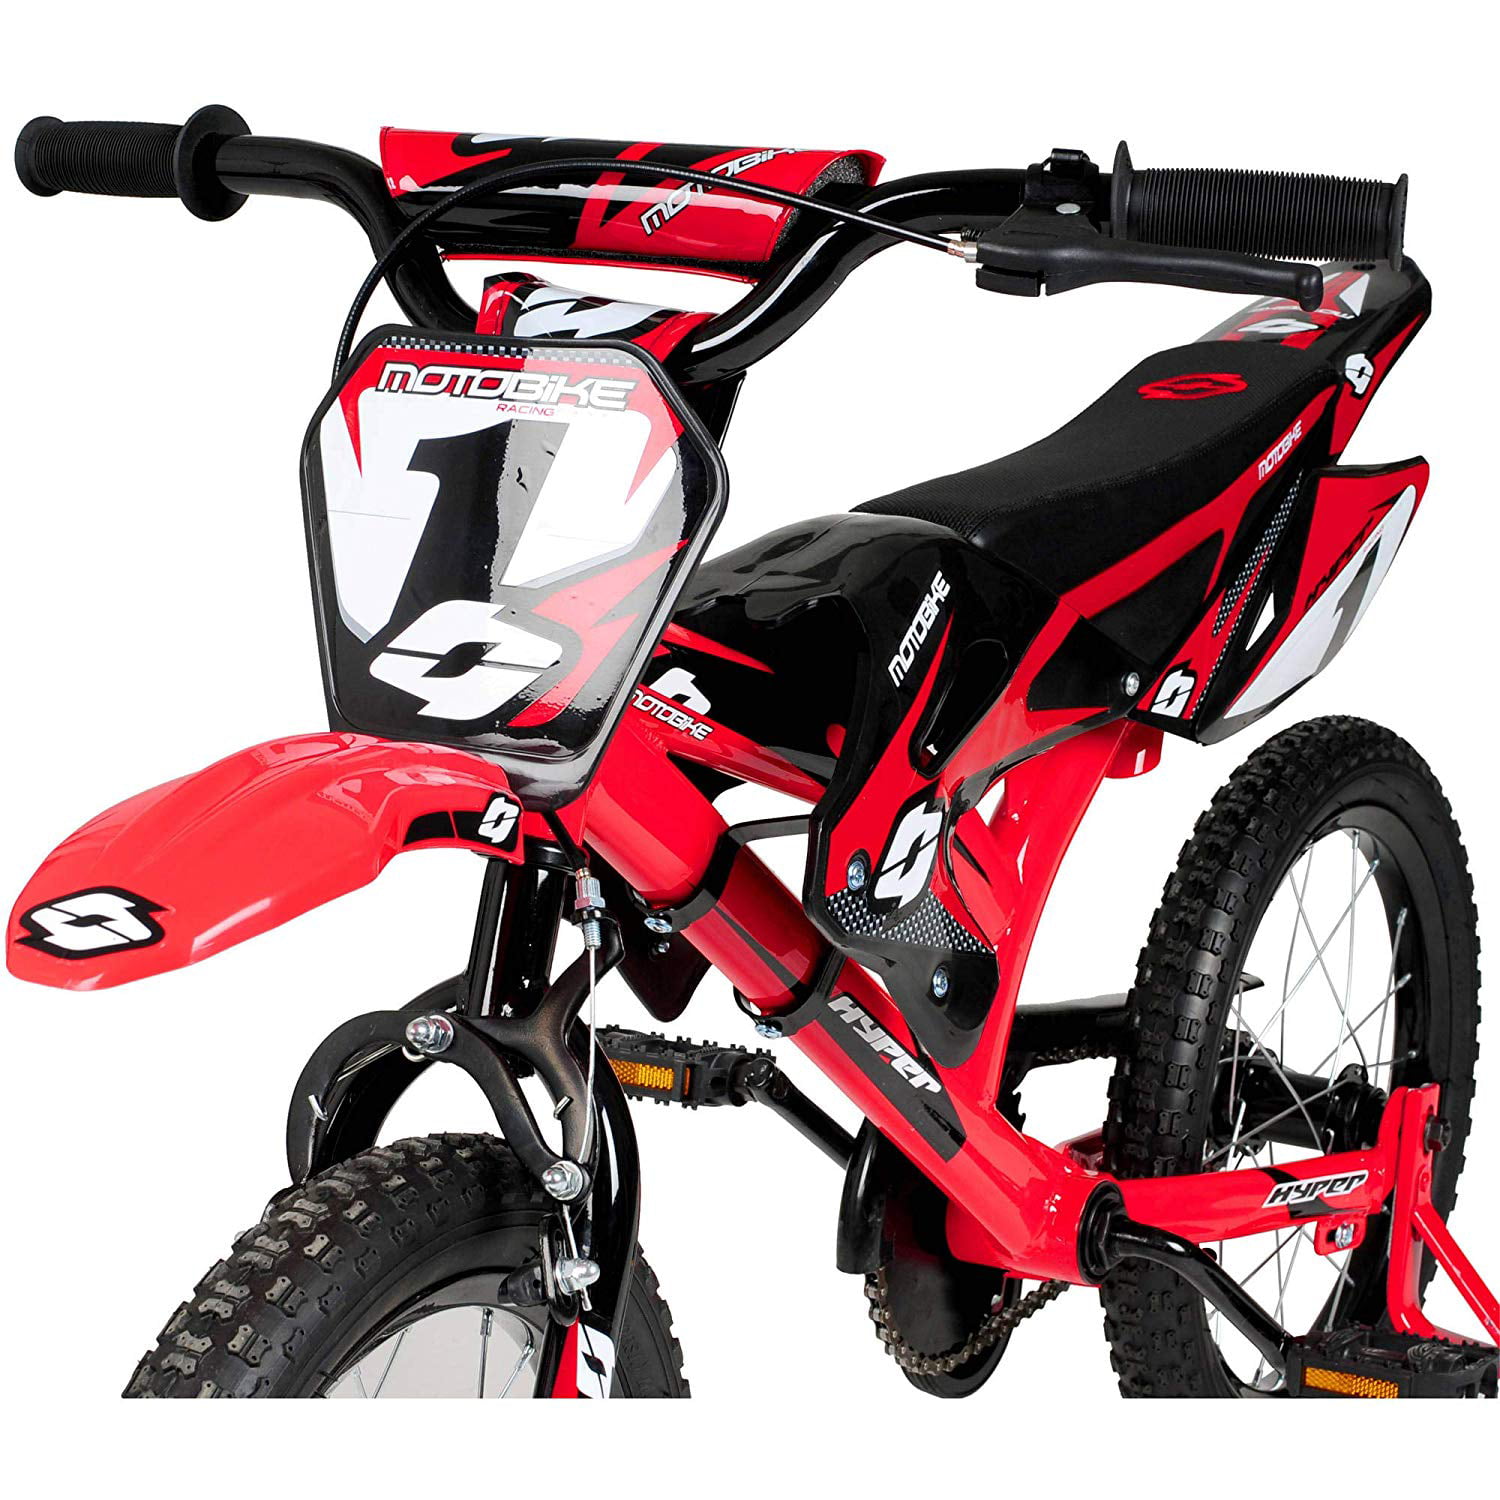 Details about   Child BMX Bike 12 Inch Dirt Bike For Kids Motorbike Motorcycle Bicycle Red Gift 